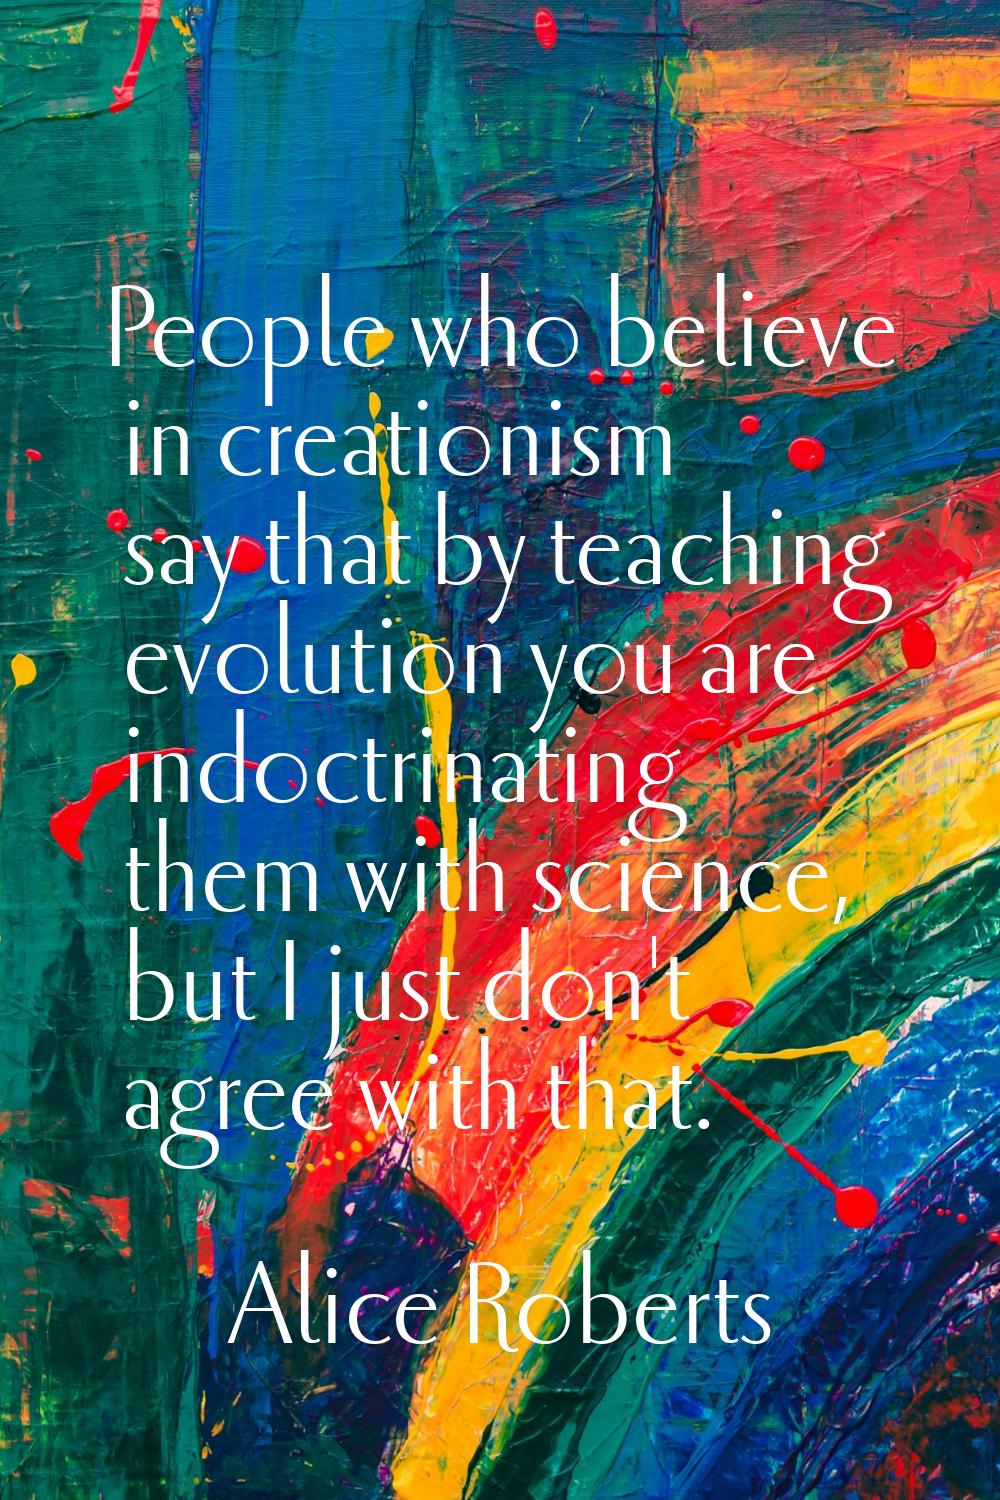 People who believe in creationism say that by teaching evolution you are indoctrinating them with s